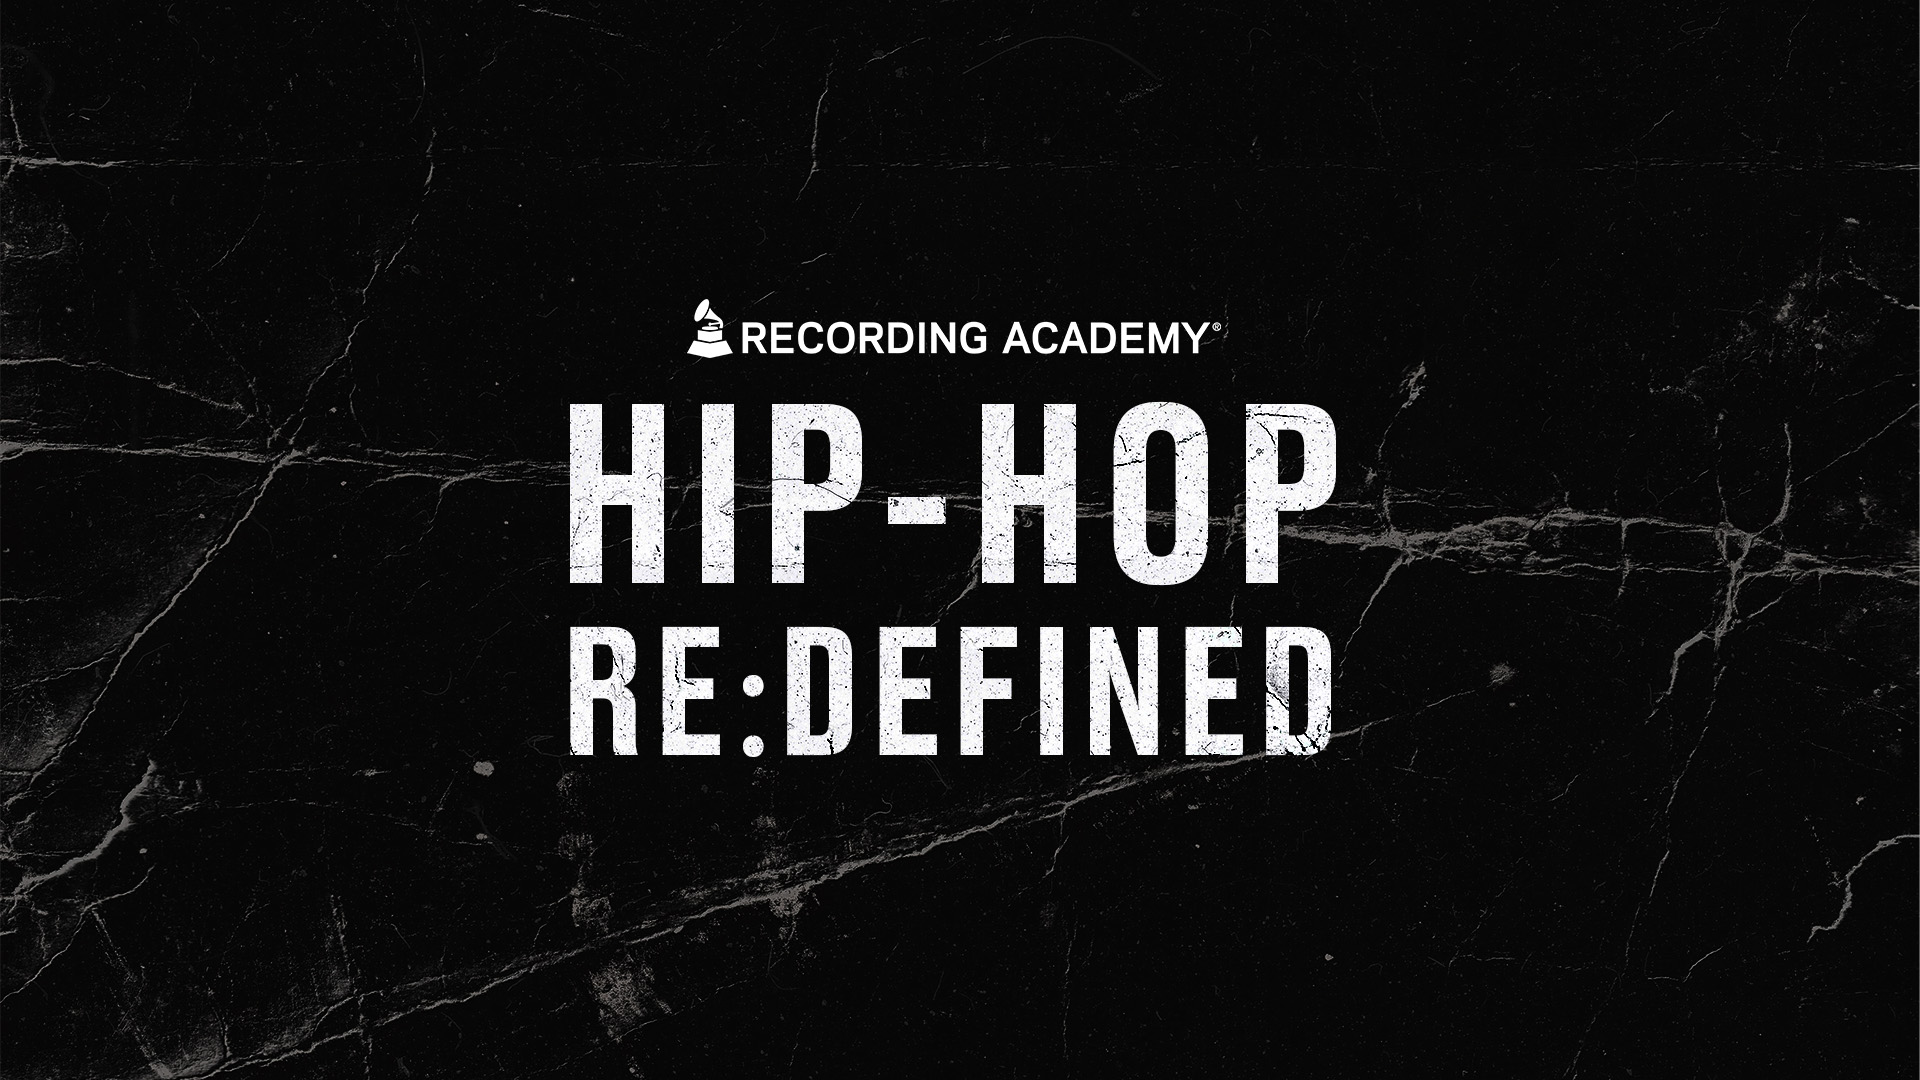 Watch Asha Imuno Personalize Kendrick Lamar's "i" With A Sparkling New Chorus | Hip-Hop Re:Defined